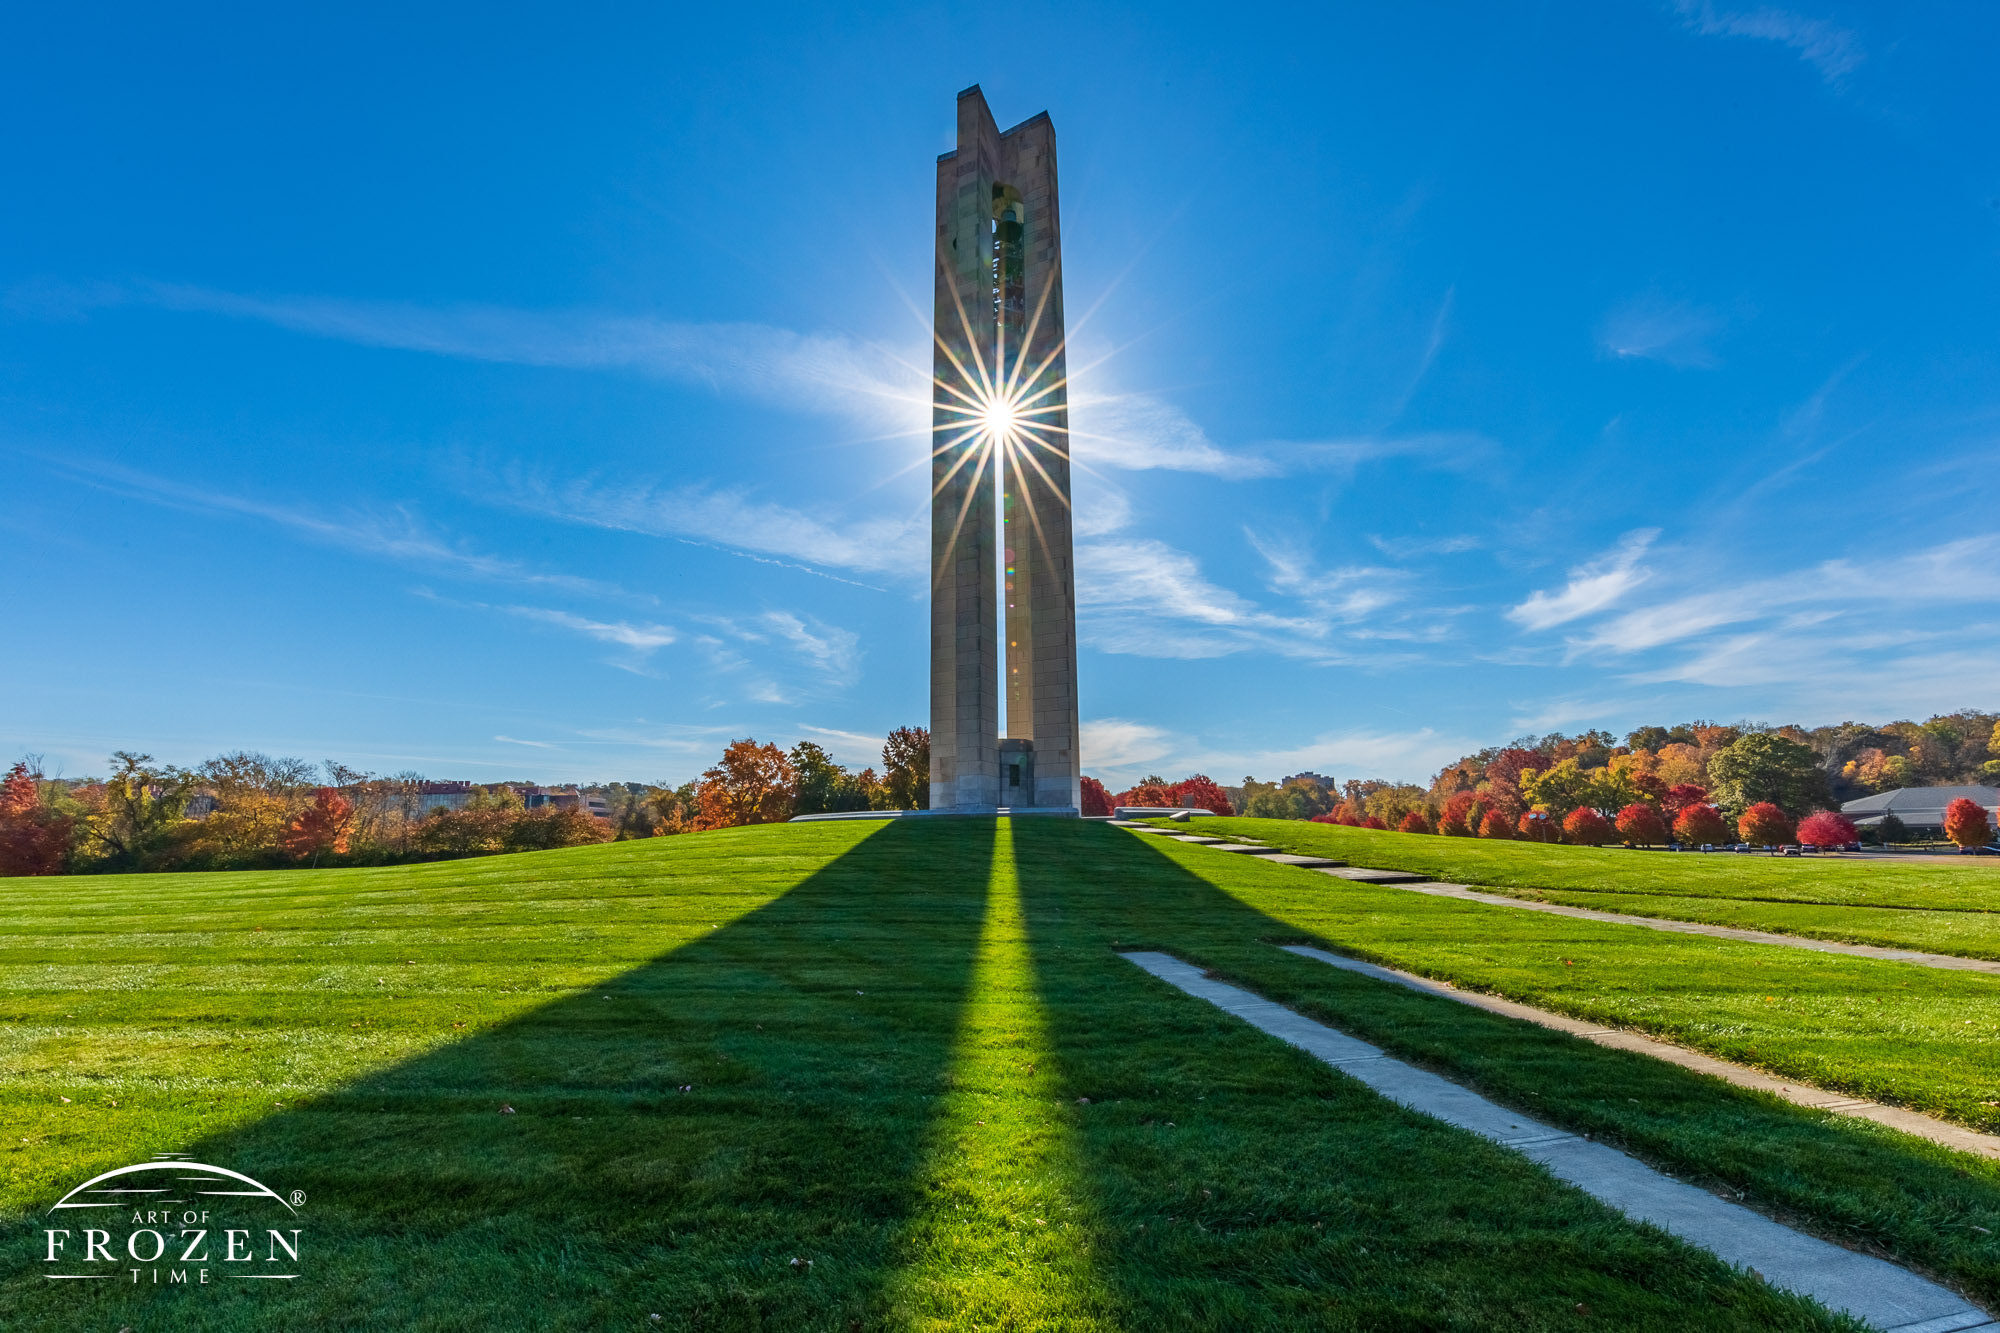 Dayton Fine Art Photography featuring the Deeds Carillon during a brisk and colorful fall morning.